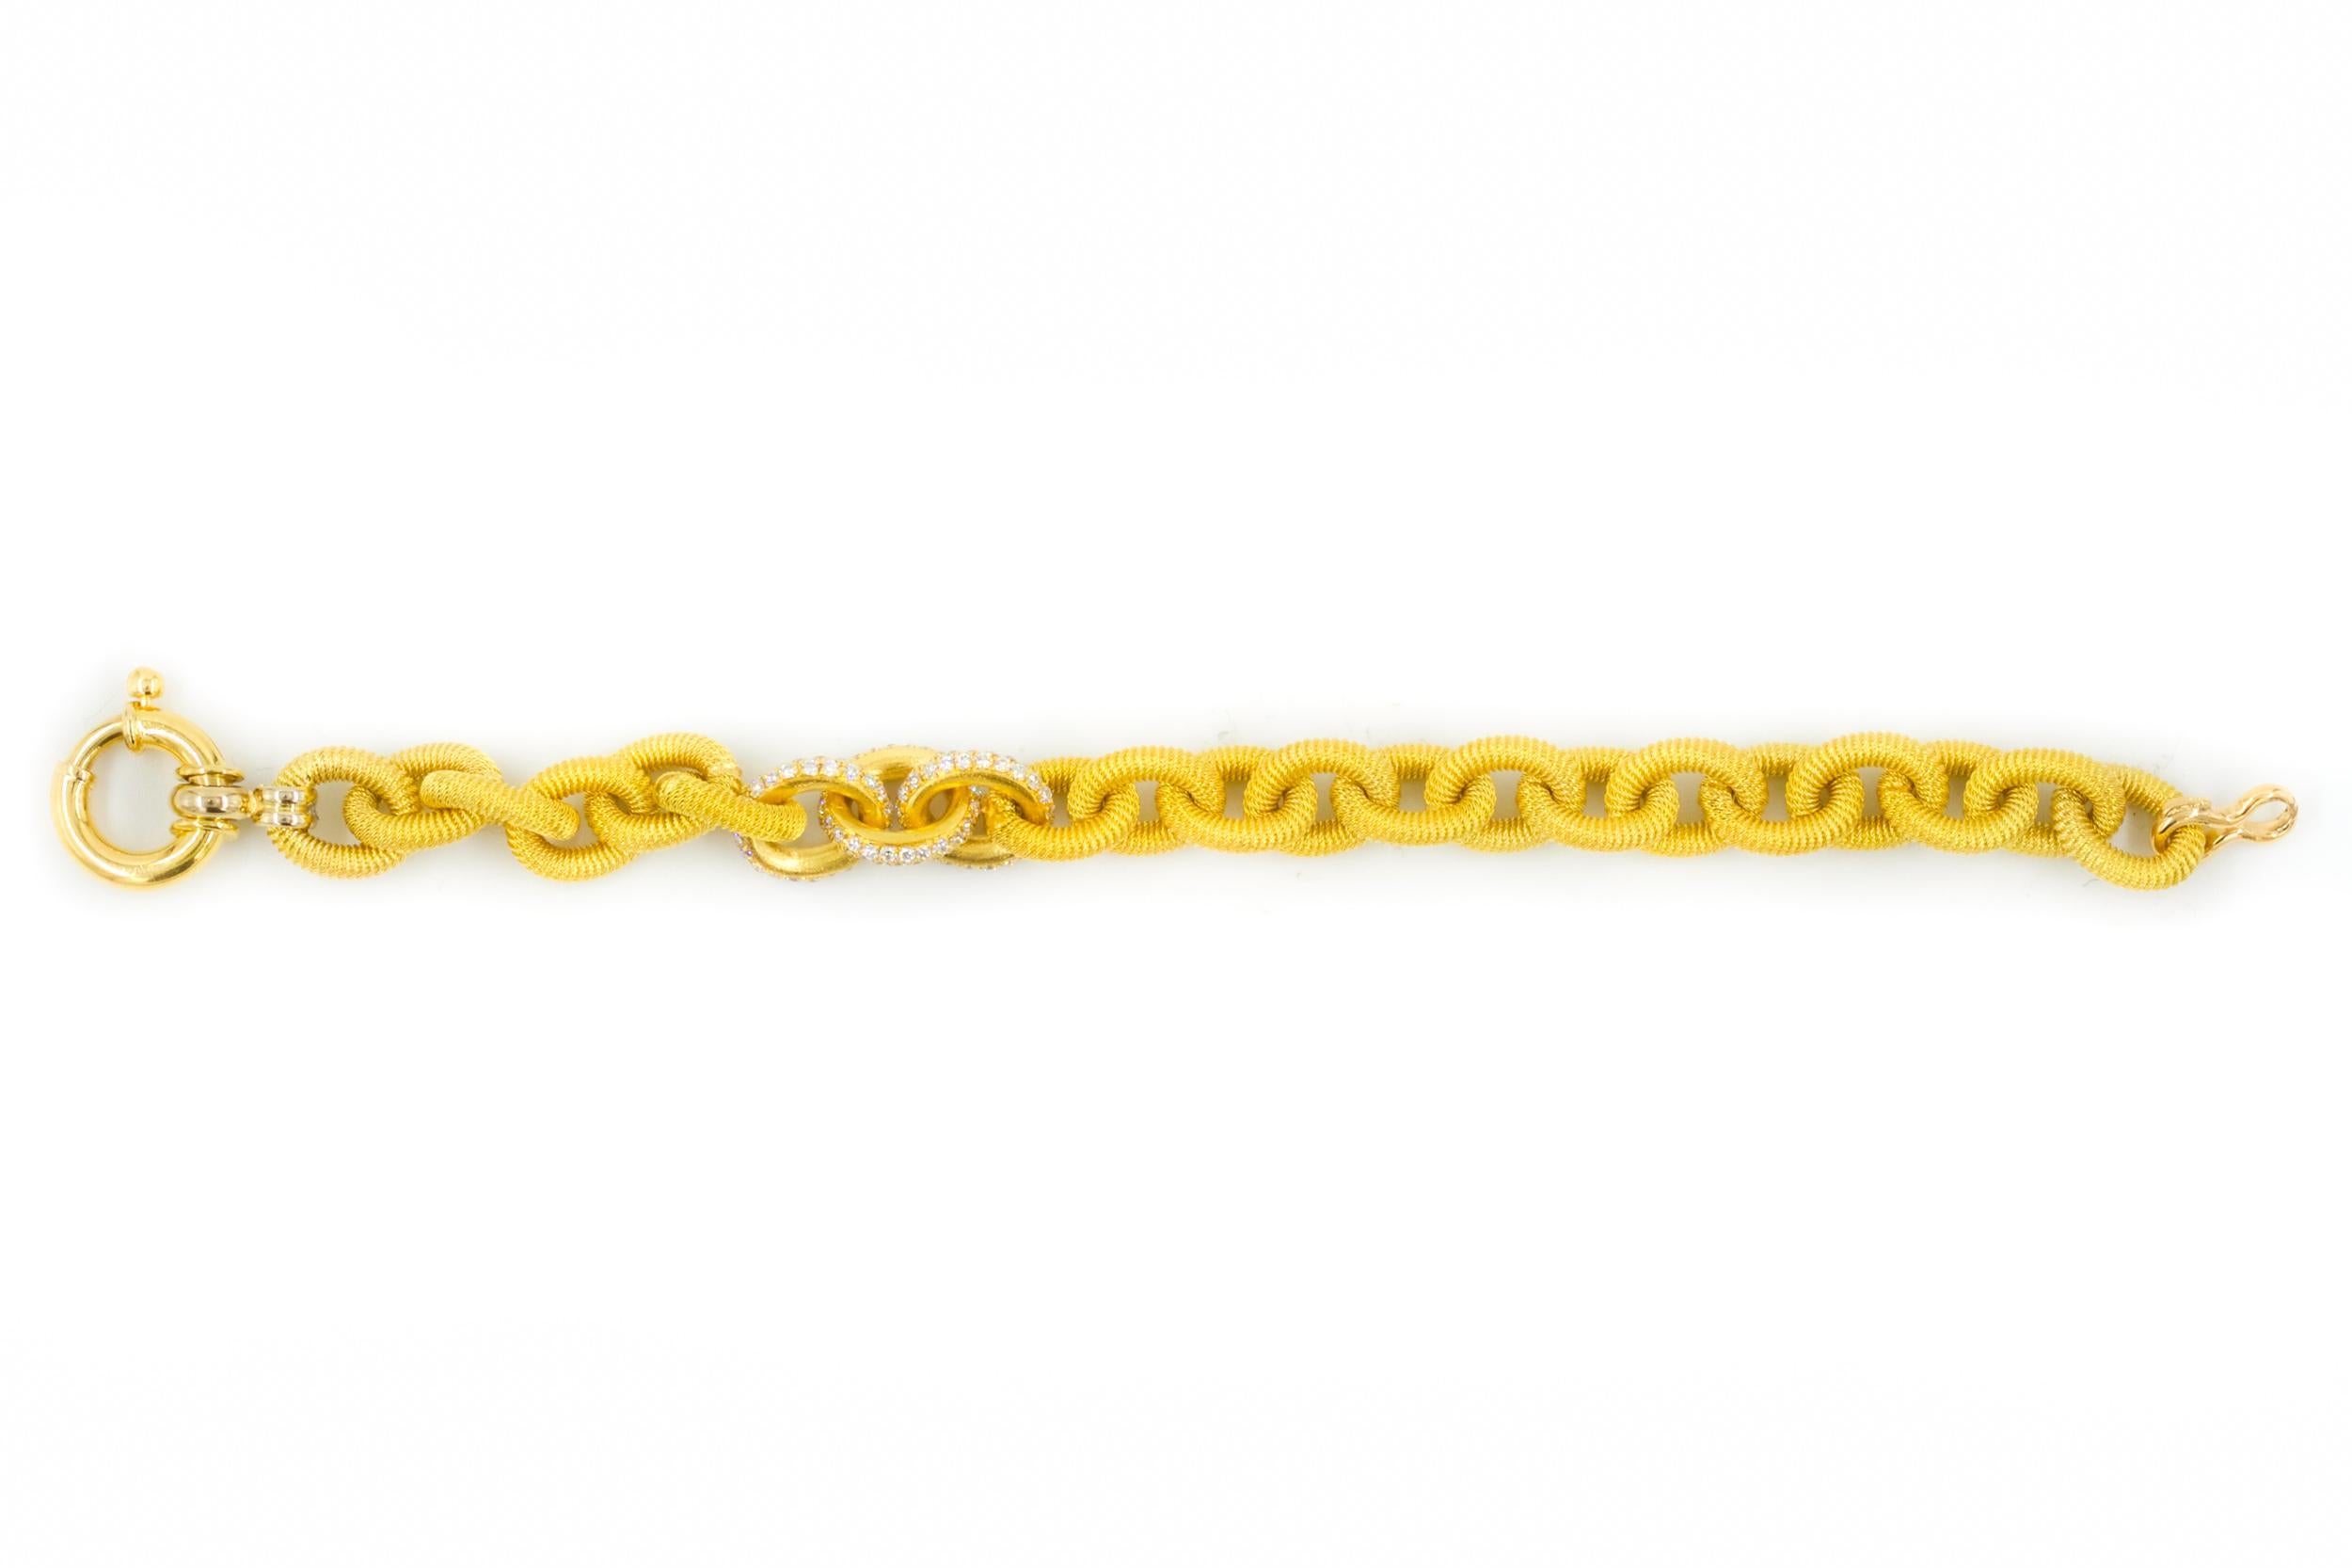 Just magnificent! This gorgeous estate 18 karat Italian yellow gold open-link bracelet is characterized by a ribbed and textured link surface with an overall matte finish; three links are set with 138 brilliant round-cut diamonds in a continuous